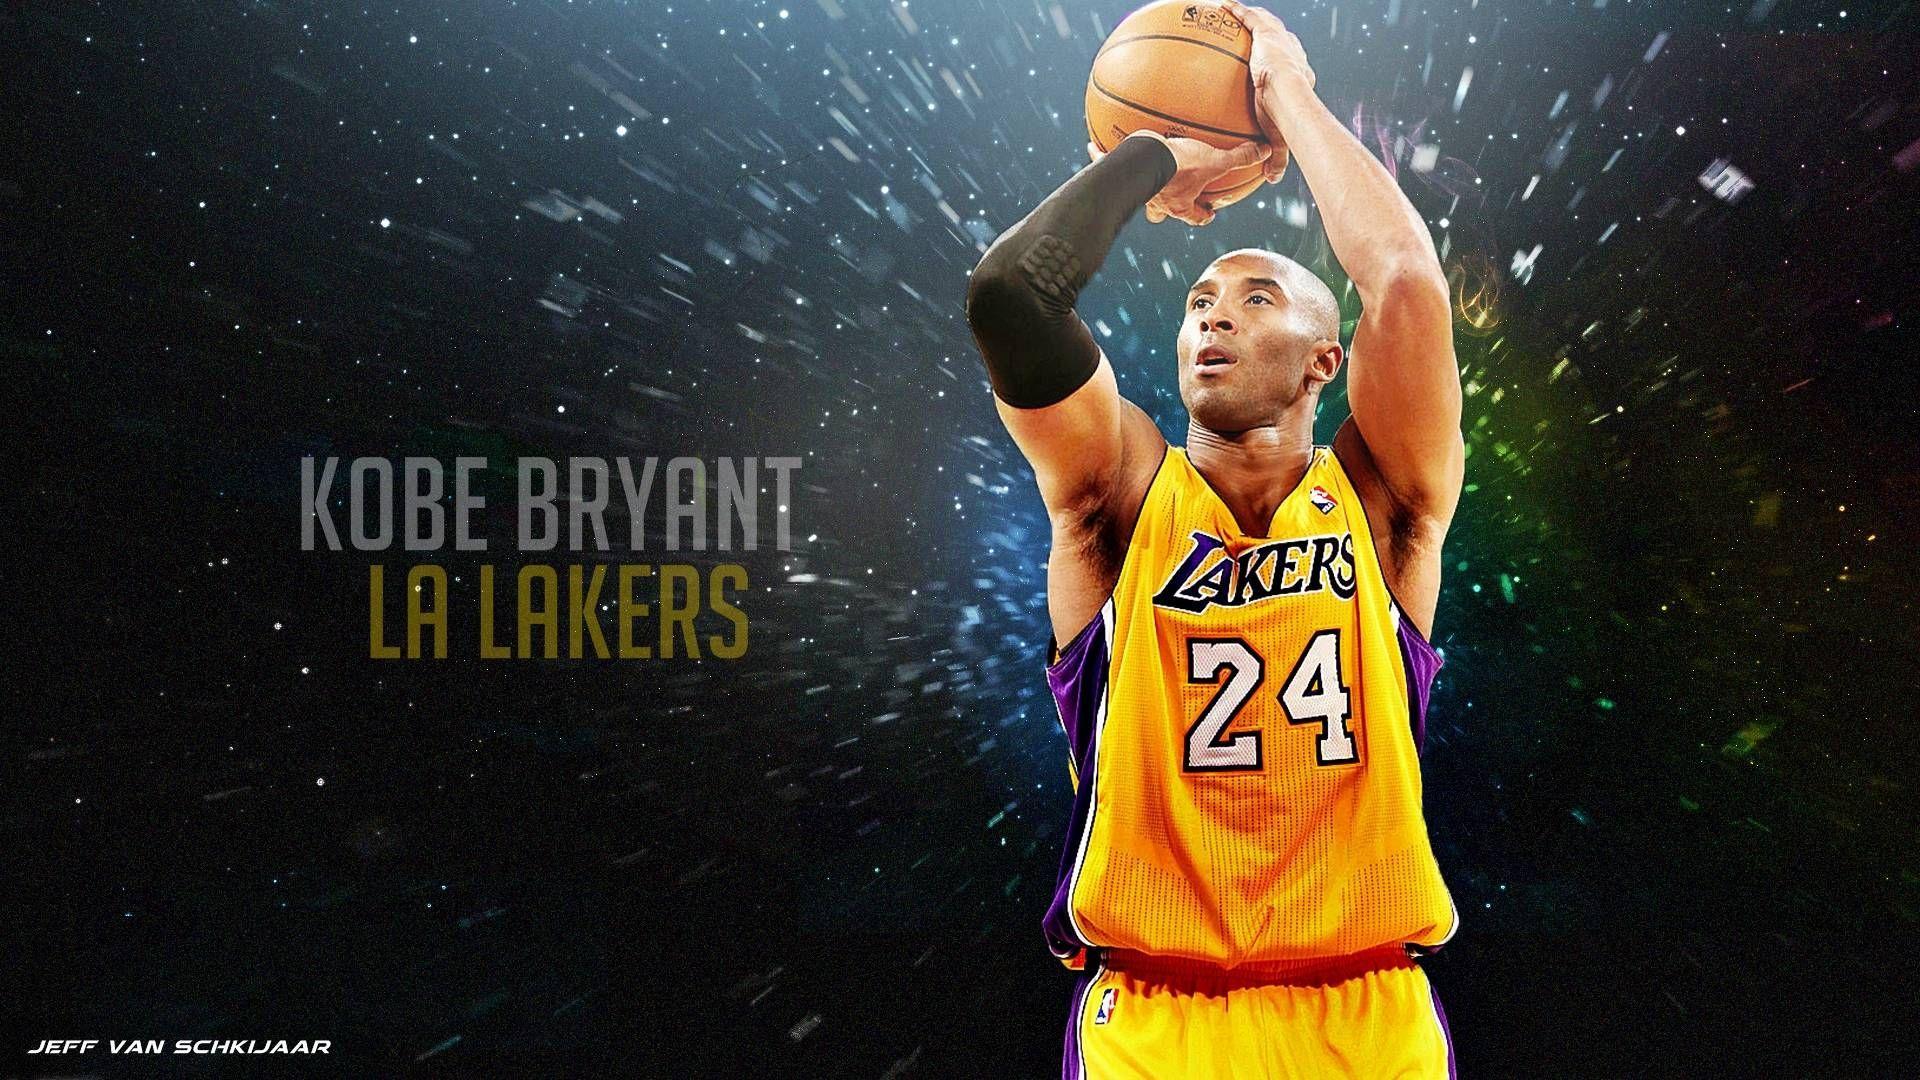 2023 Los Angeles Lakers wallpaper – Pro Sports Backgrounds